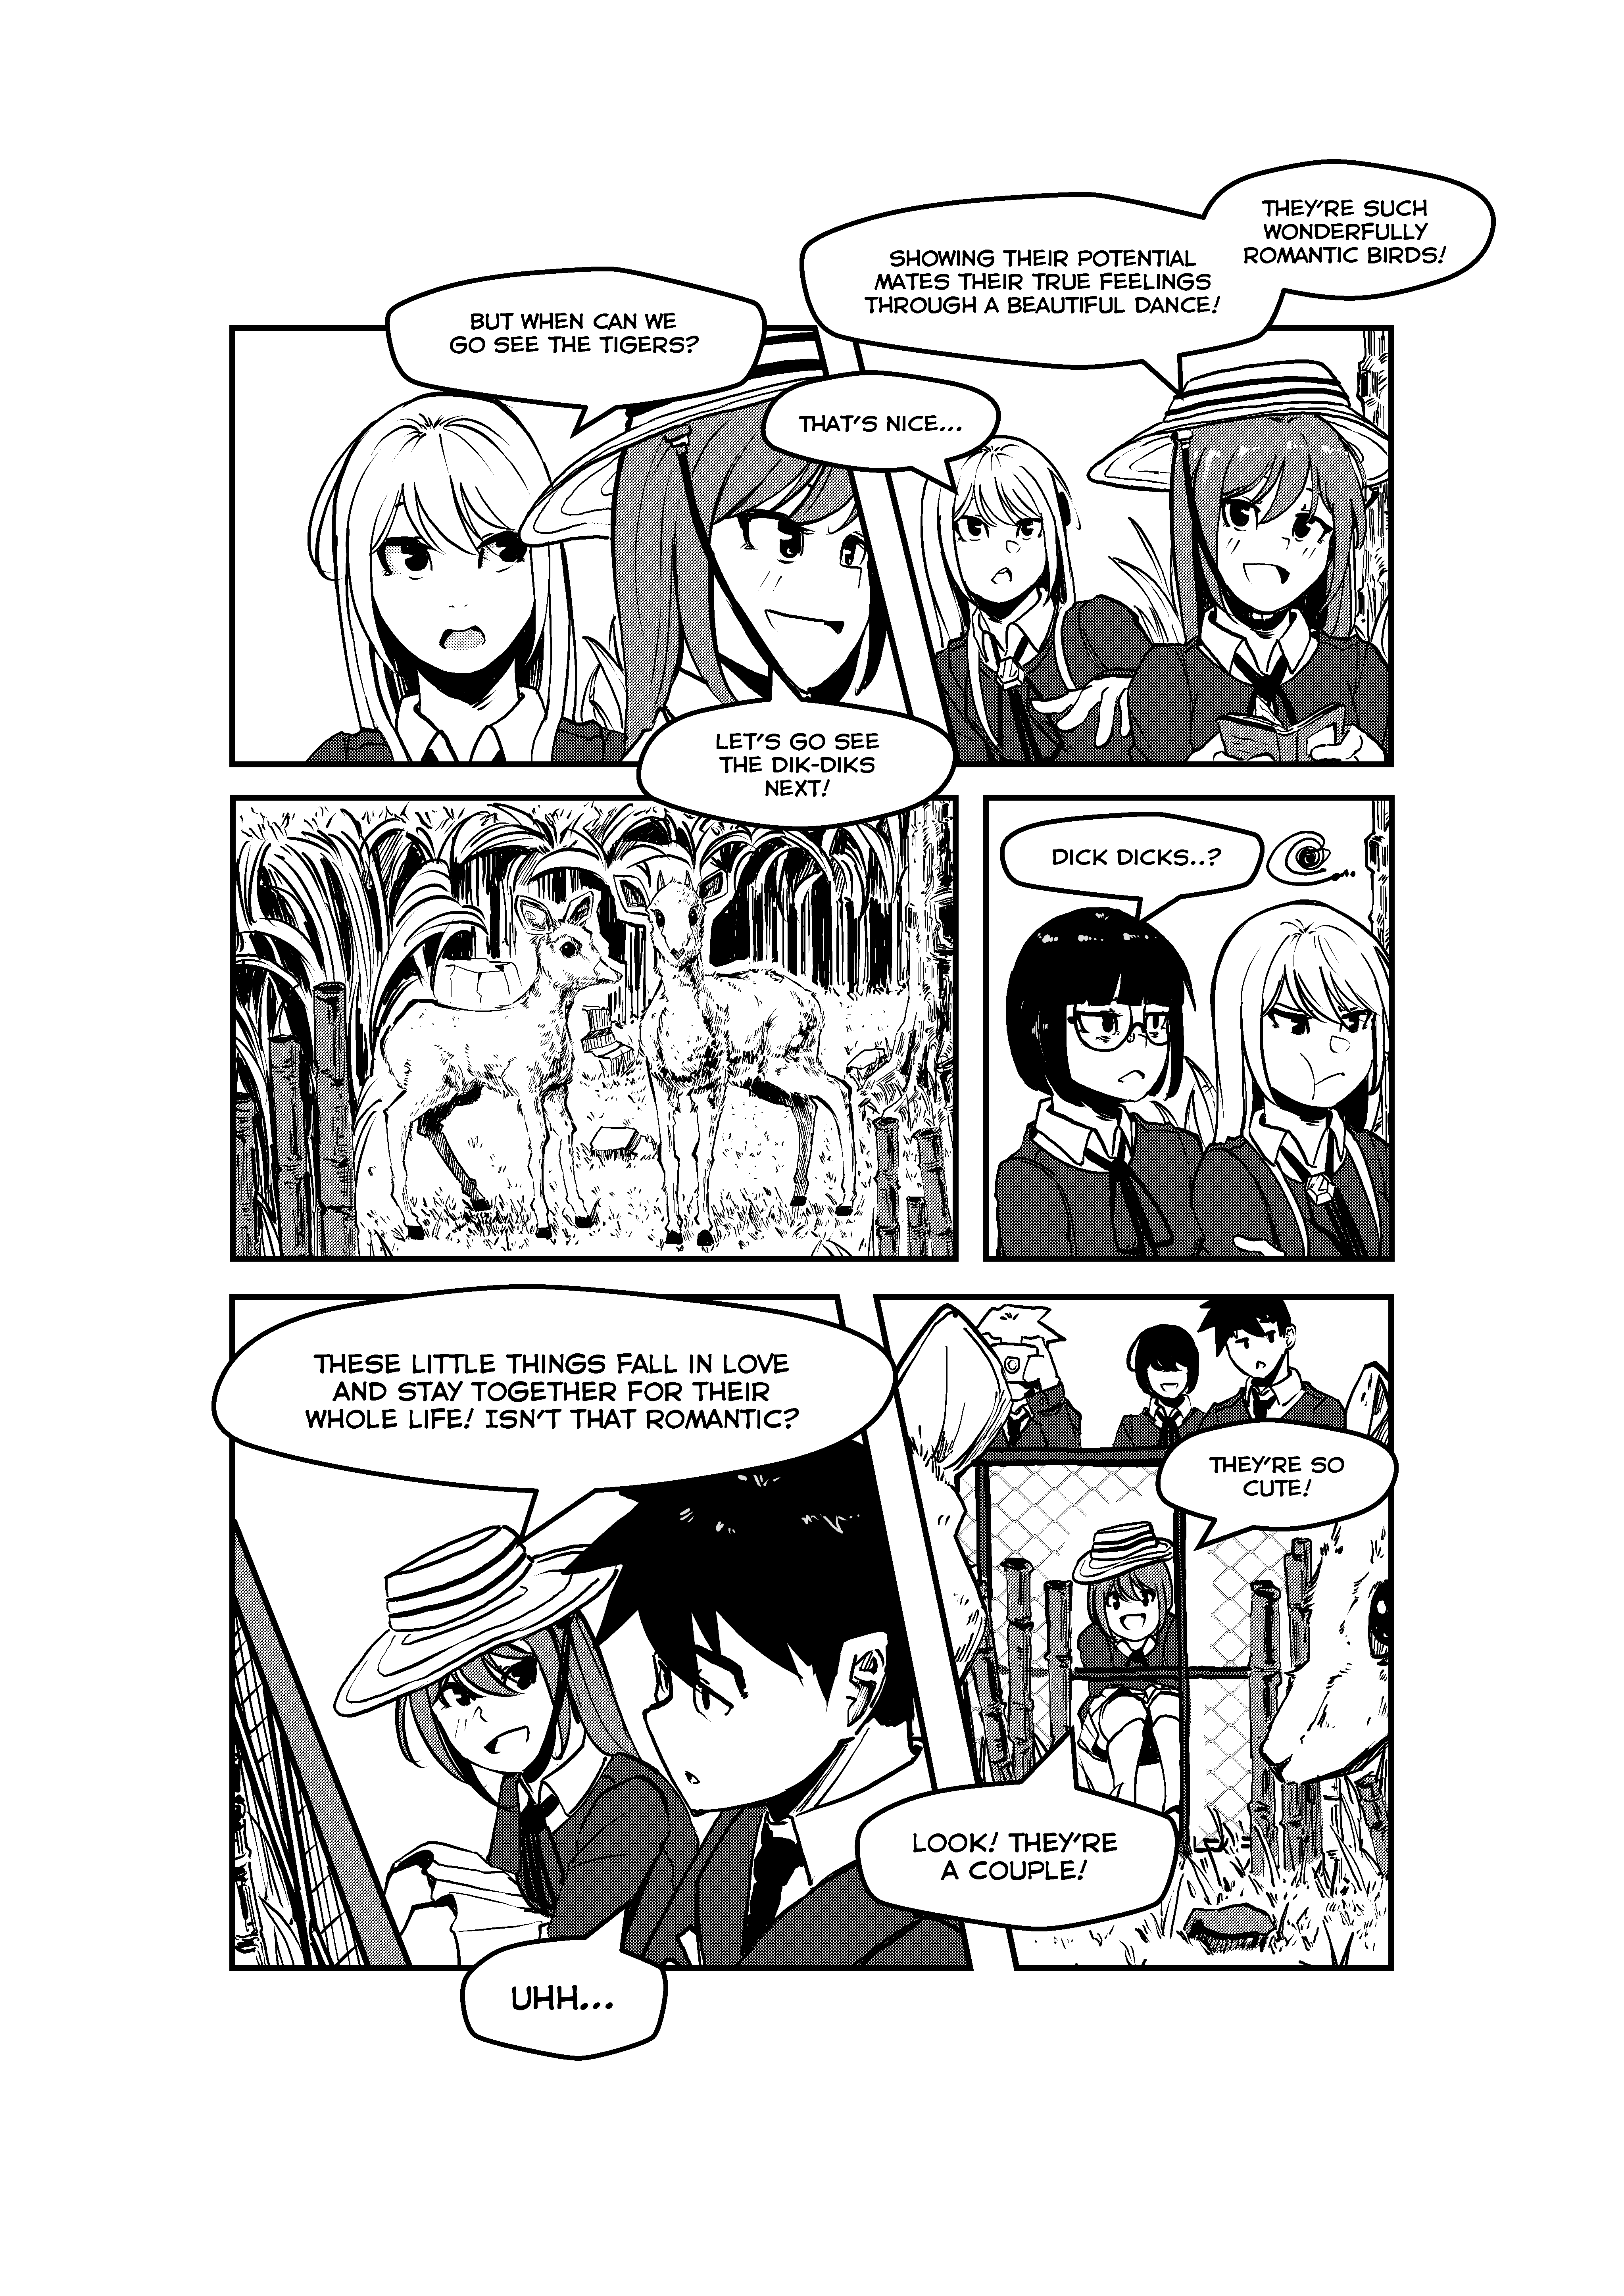 Opposites In Disguise - 20 page 23-c1b5b7a0